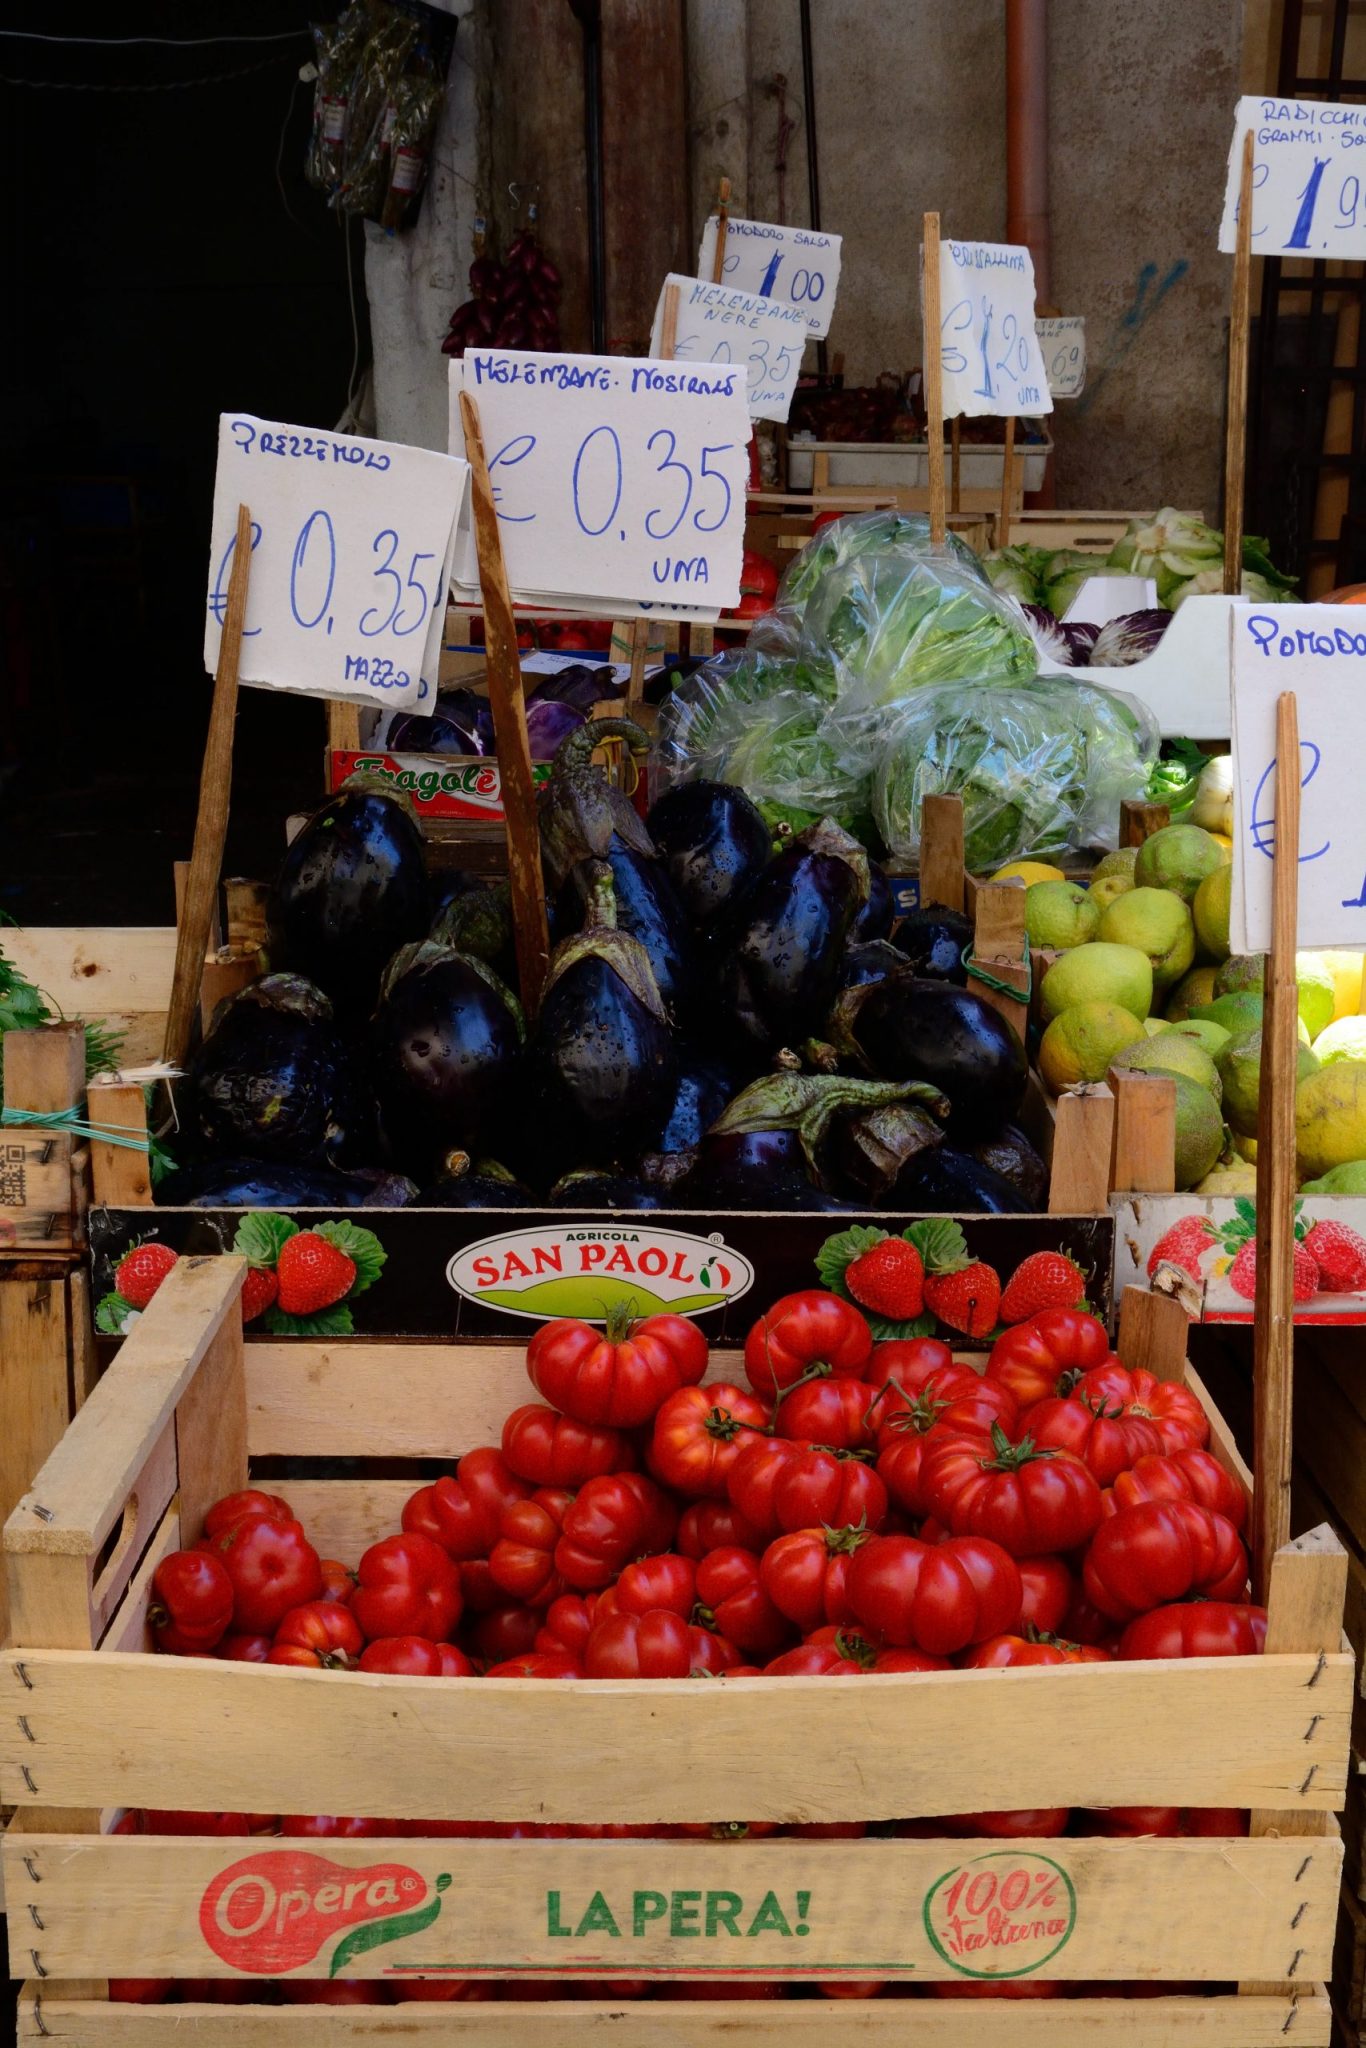 a photo of eggplants and tomatoes for sale in Italy